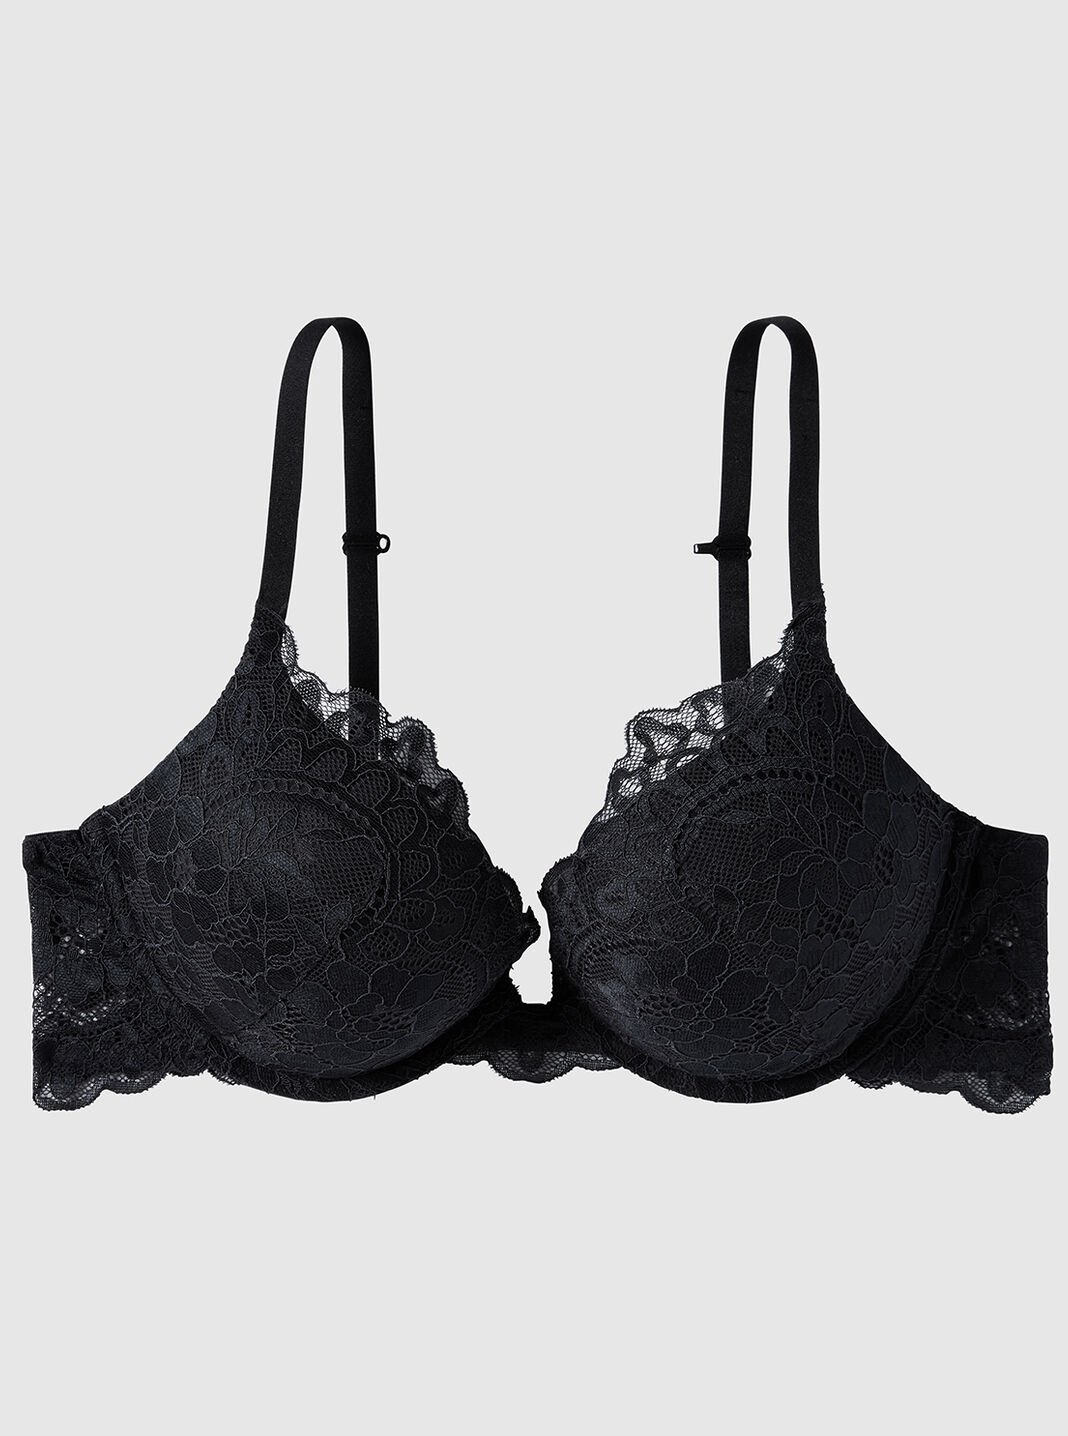 Sheer Luxe Balconette Underwire Push-up Bra Negro 34C by Ilusion